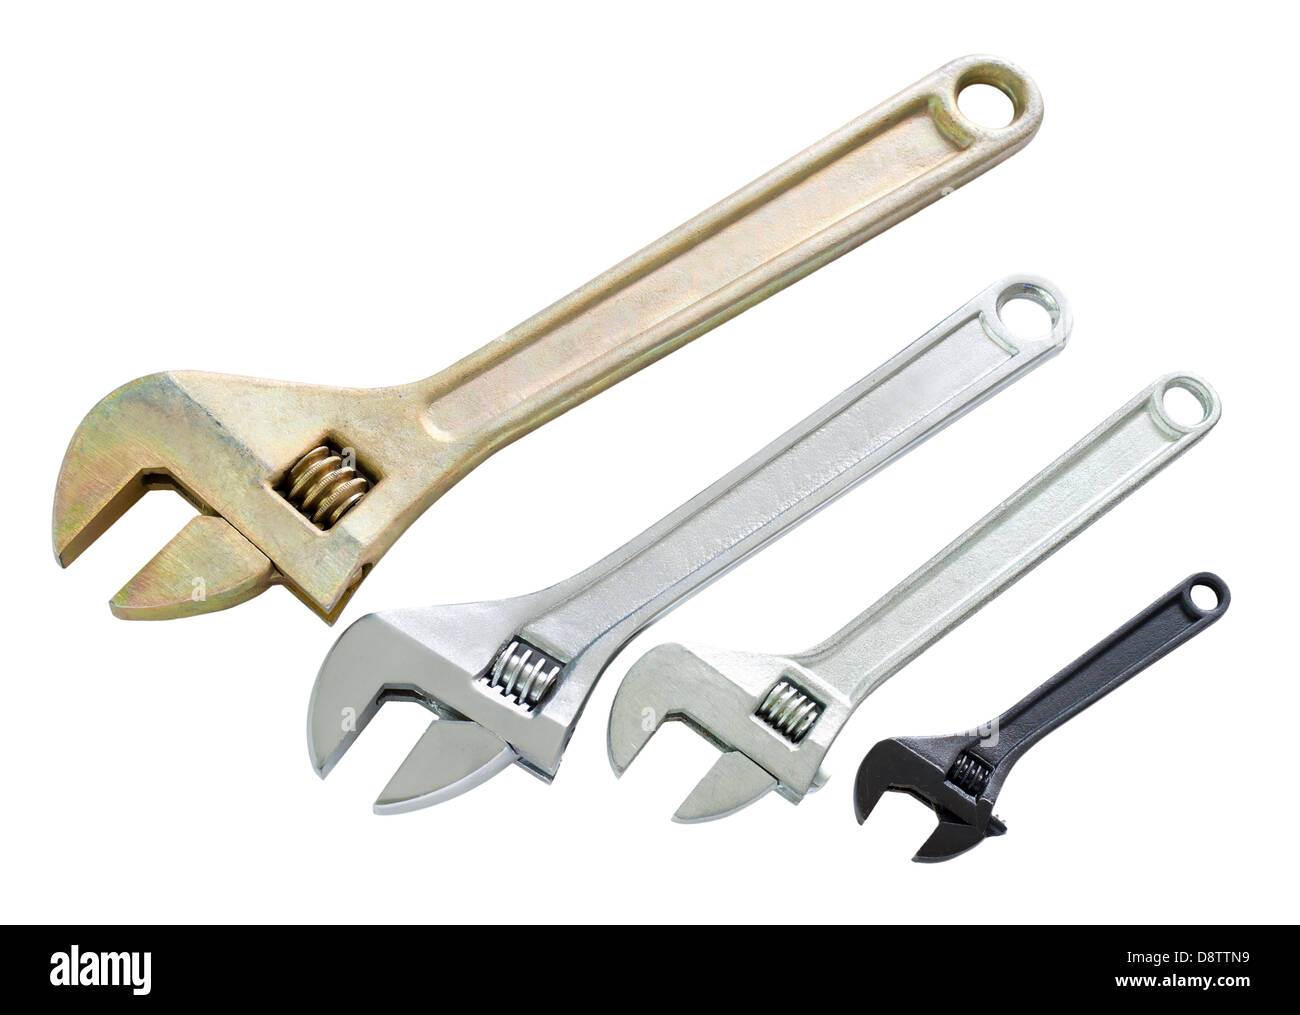 adjustable wrenches Stock Photo